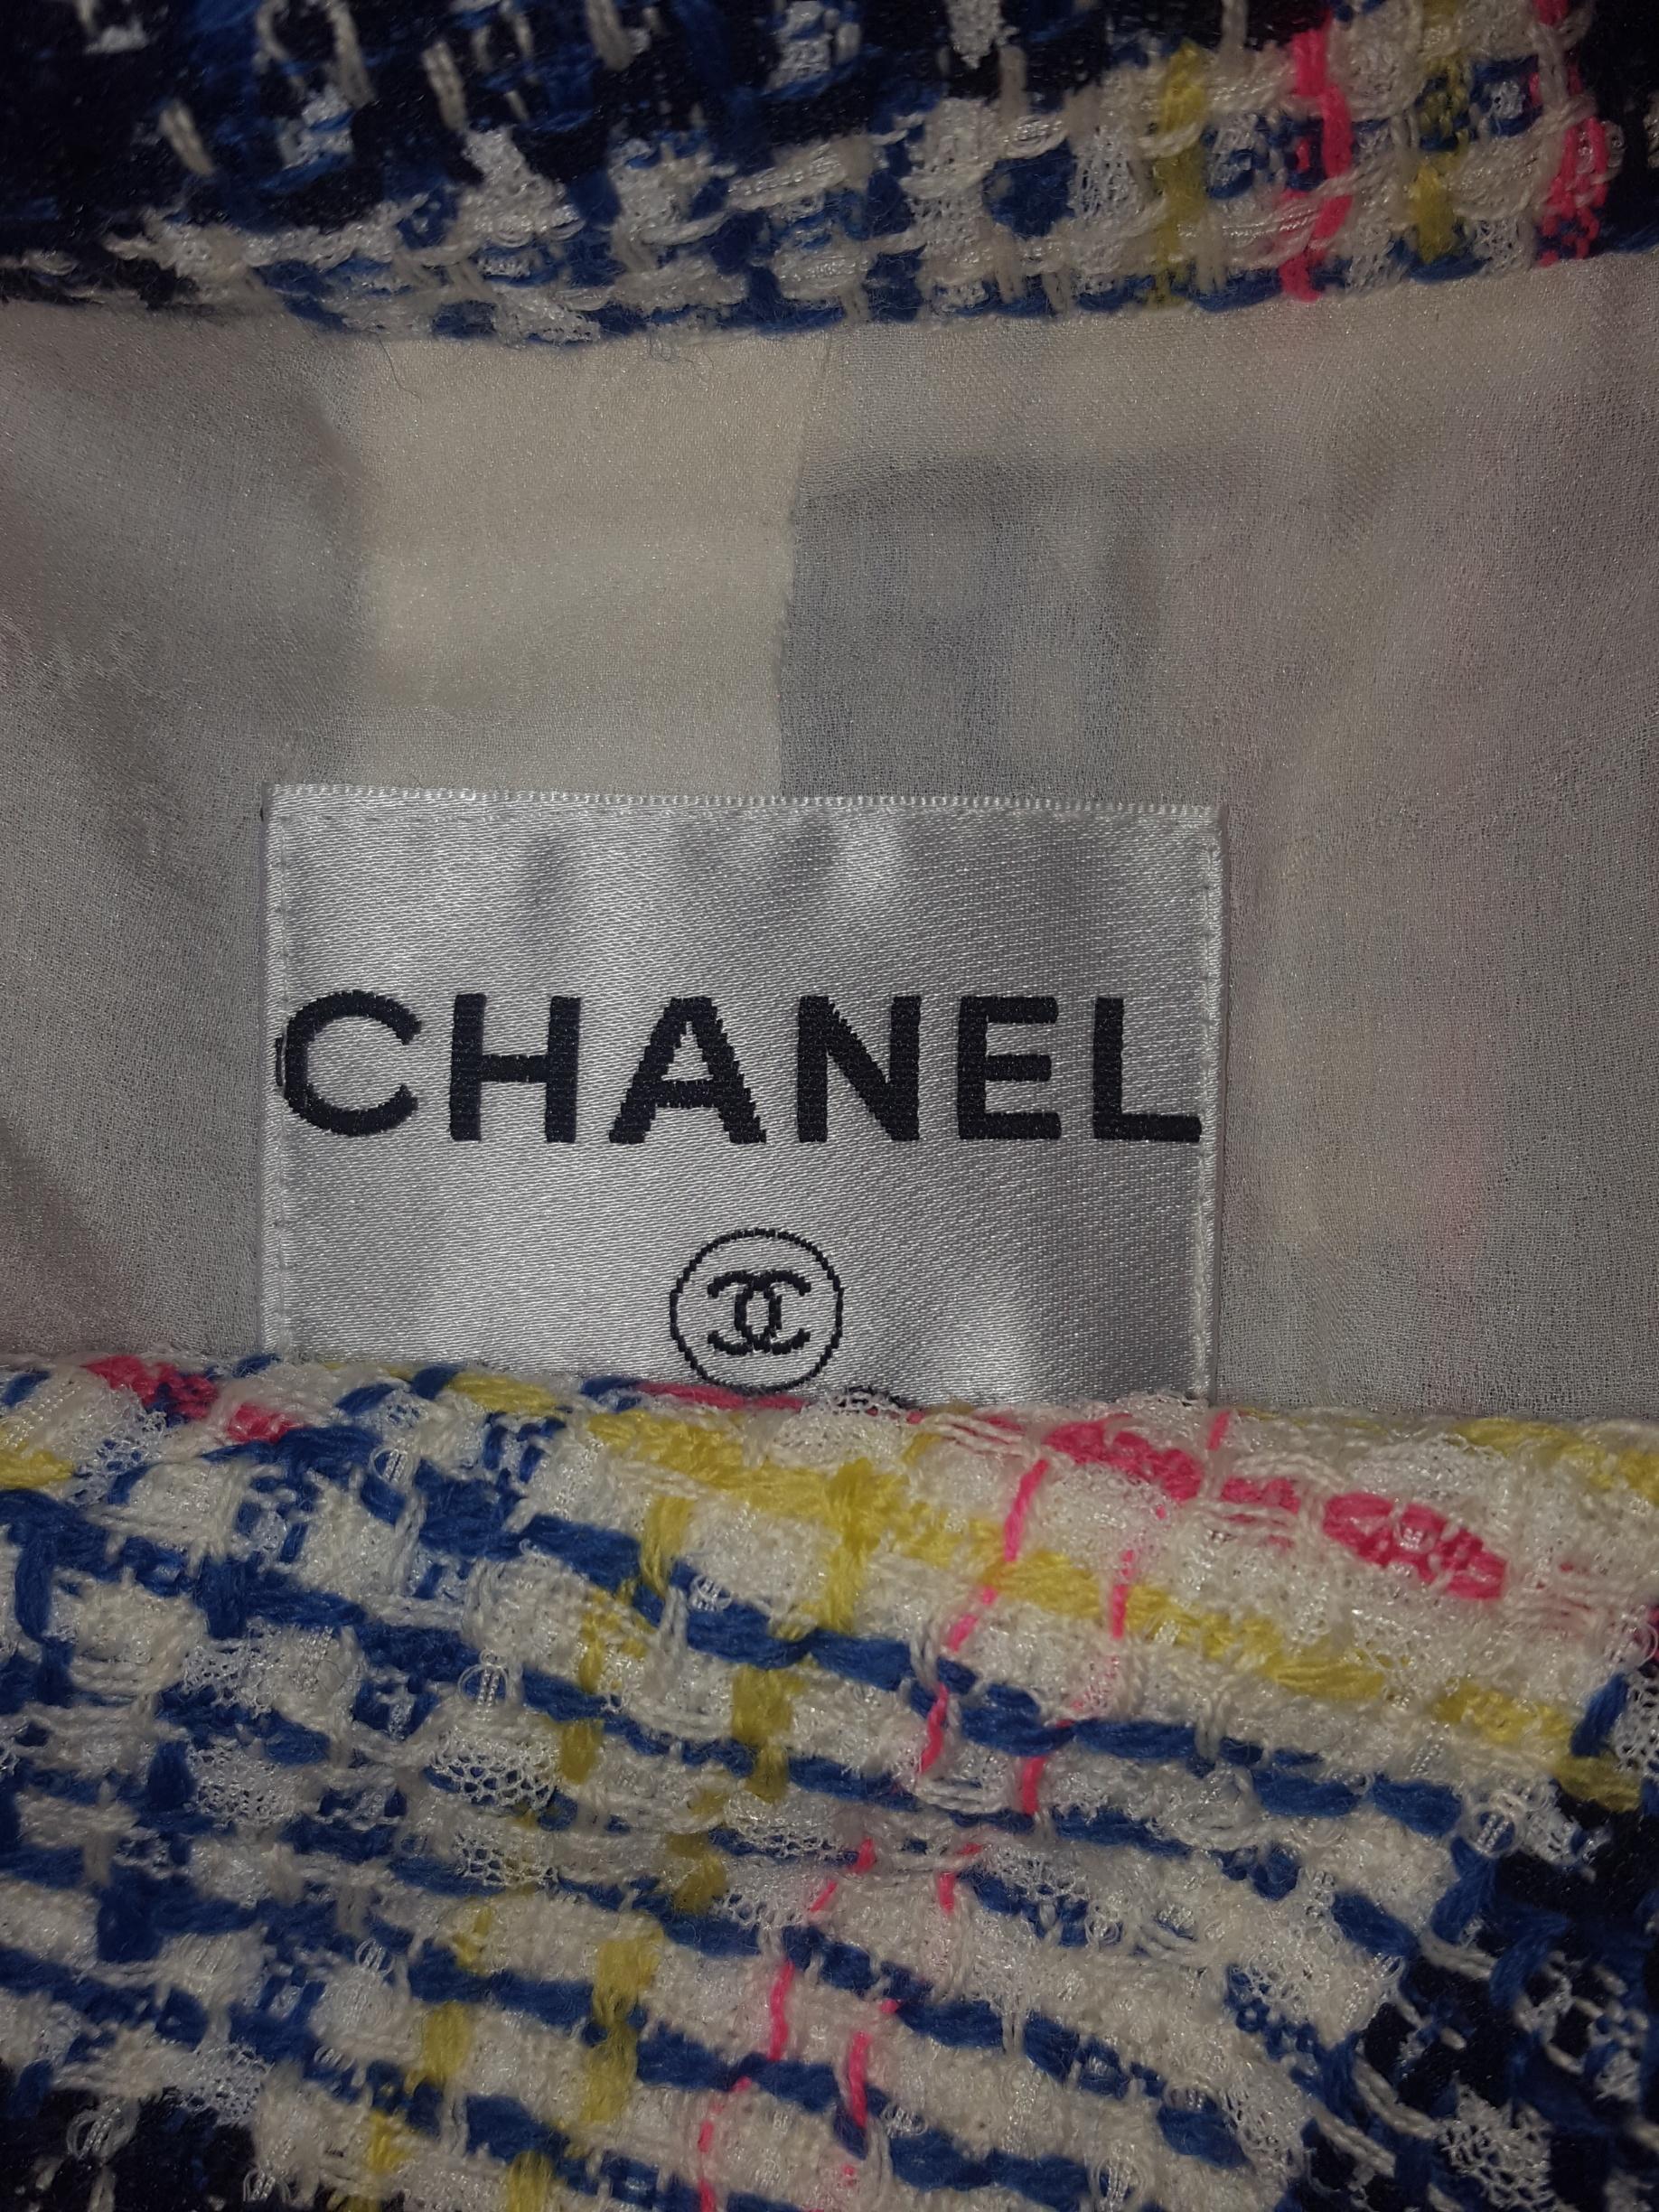 Women's or Men's Chanel White & Multicolor Tweed Skirt Suit Defines Chanel's Fashion House